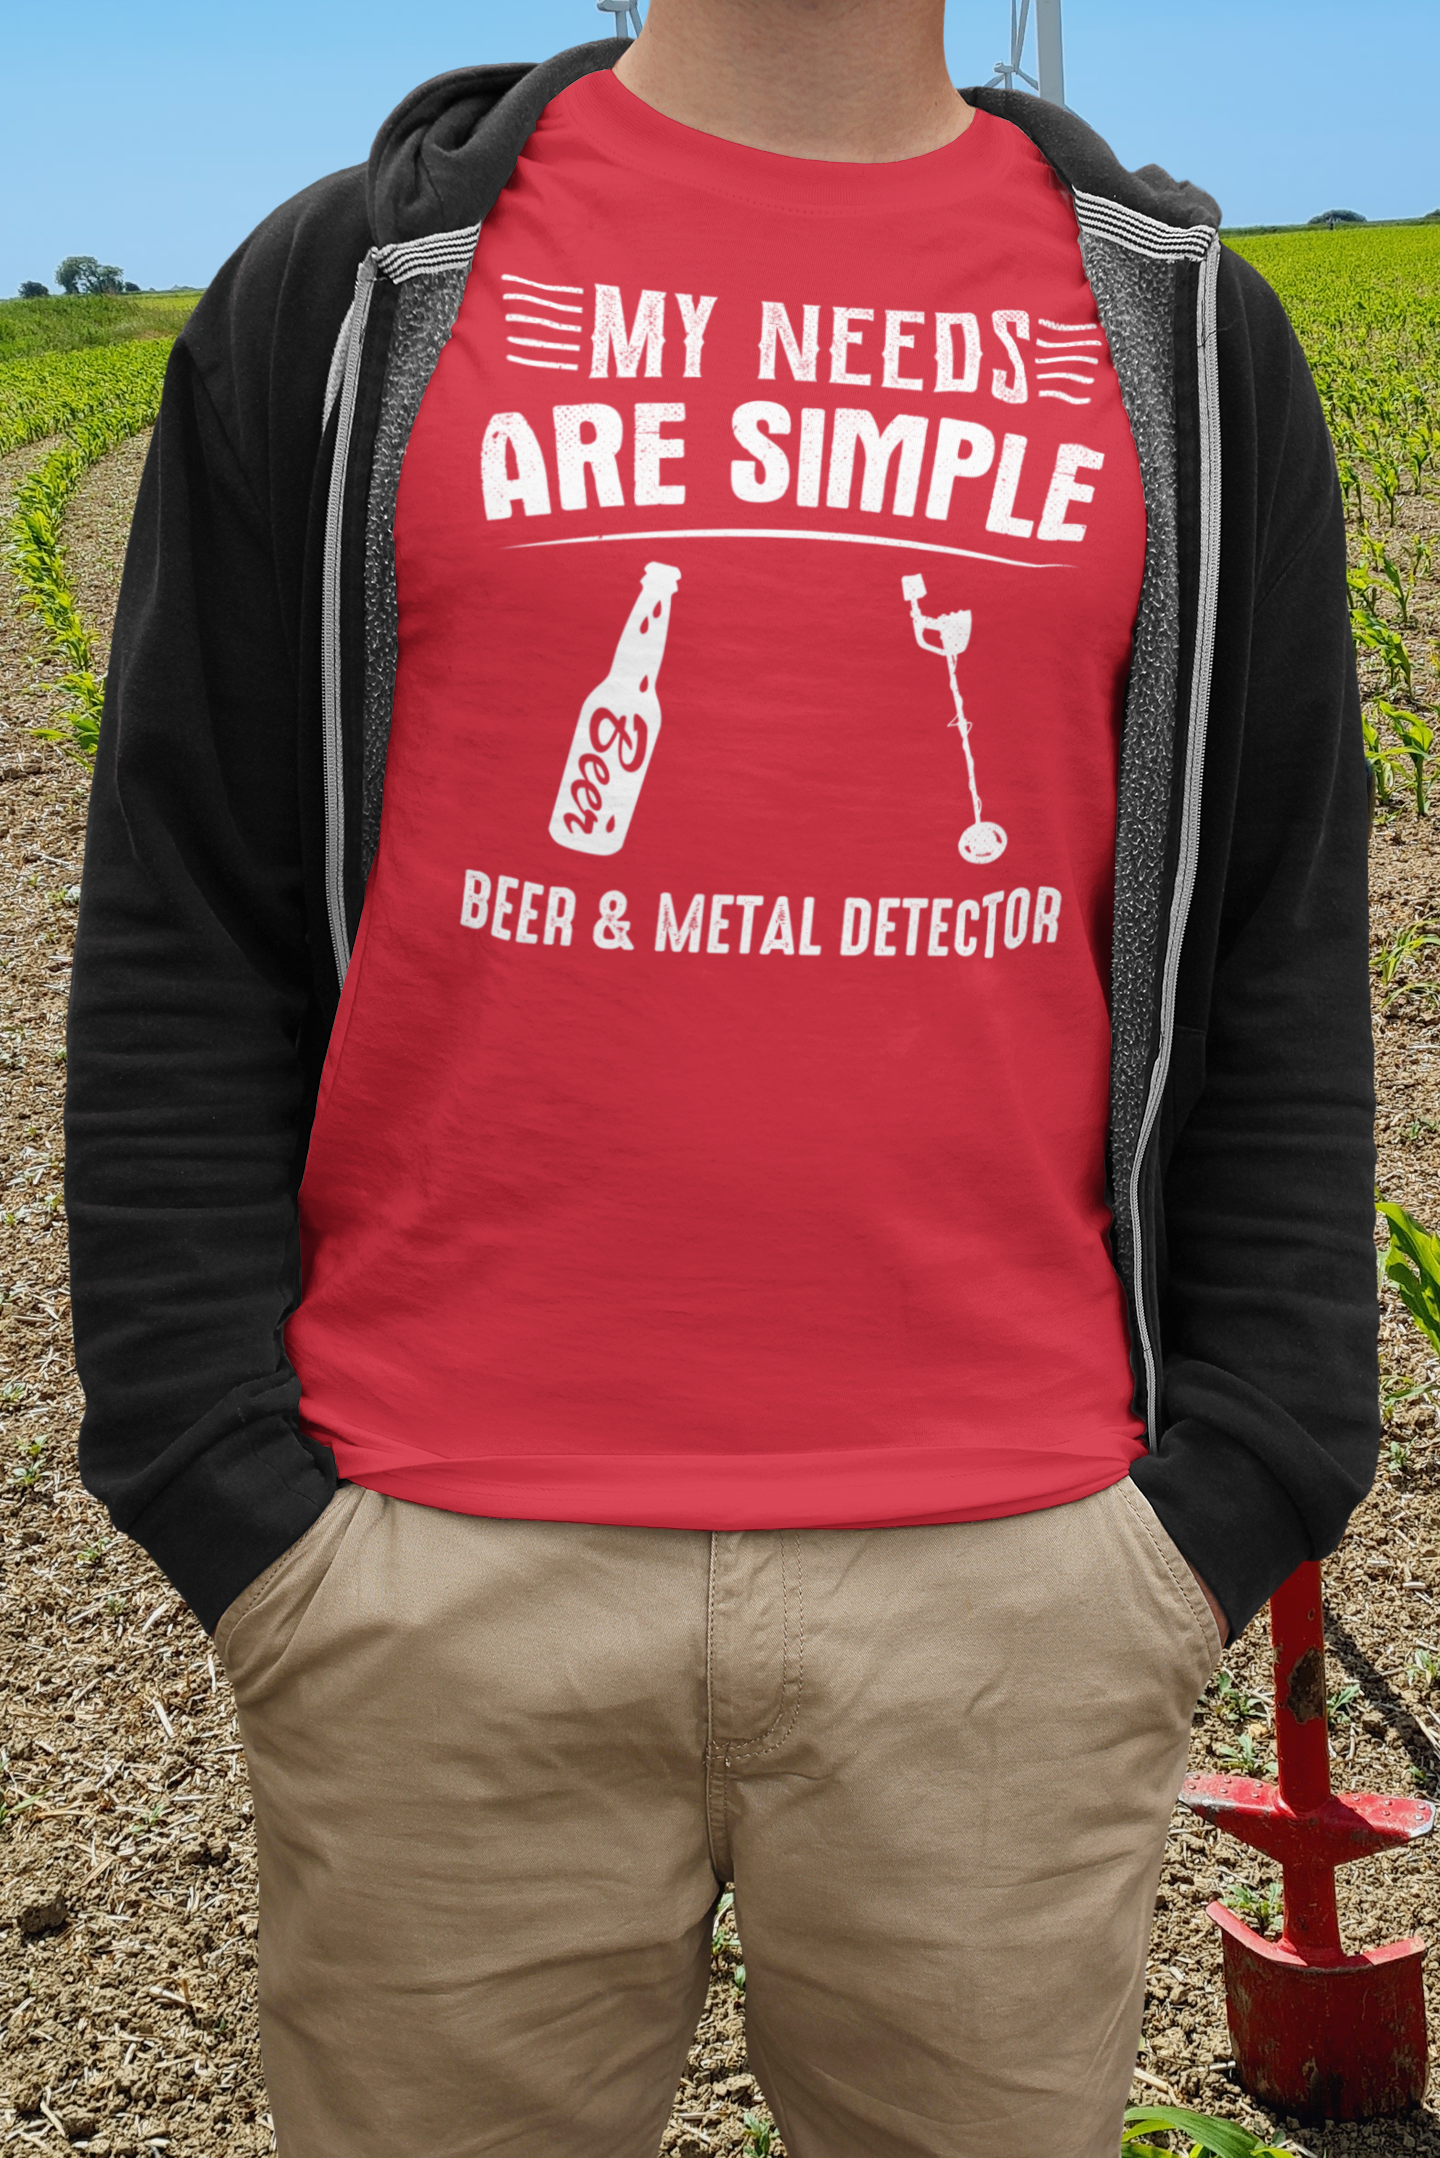 My needs are simple, beer and metal detector T-shirt